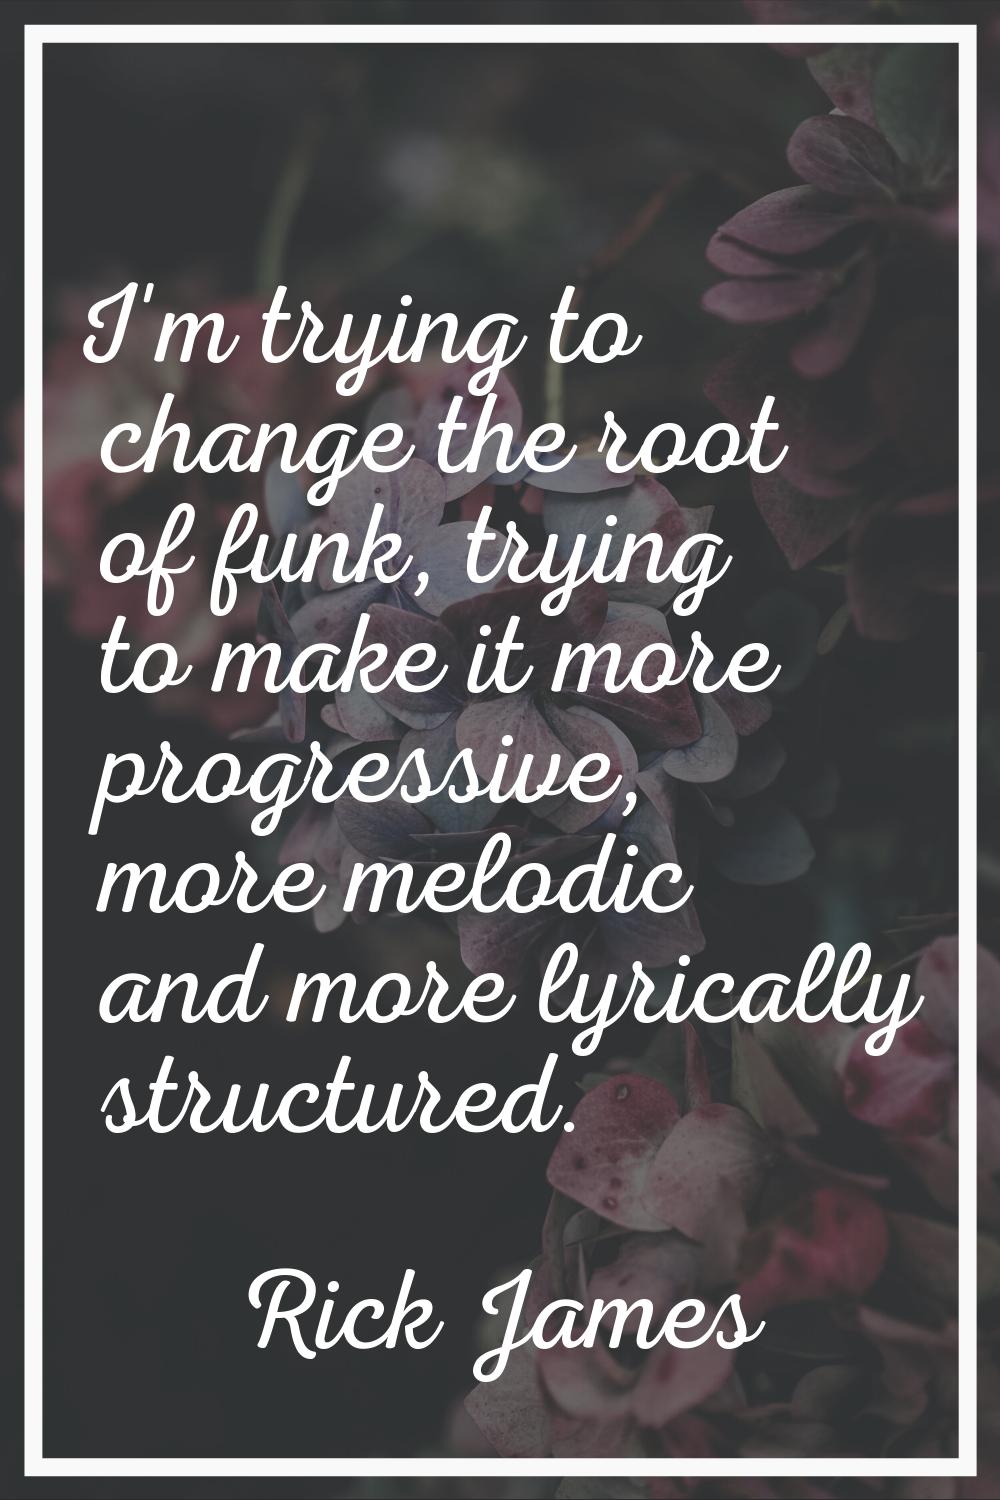 I'm trying to change the root of funk, trying to make it more progressive, more melodic and more ly